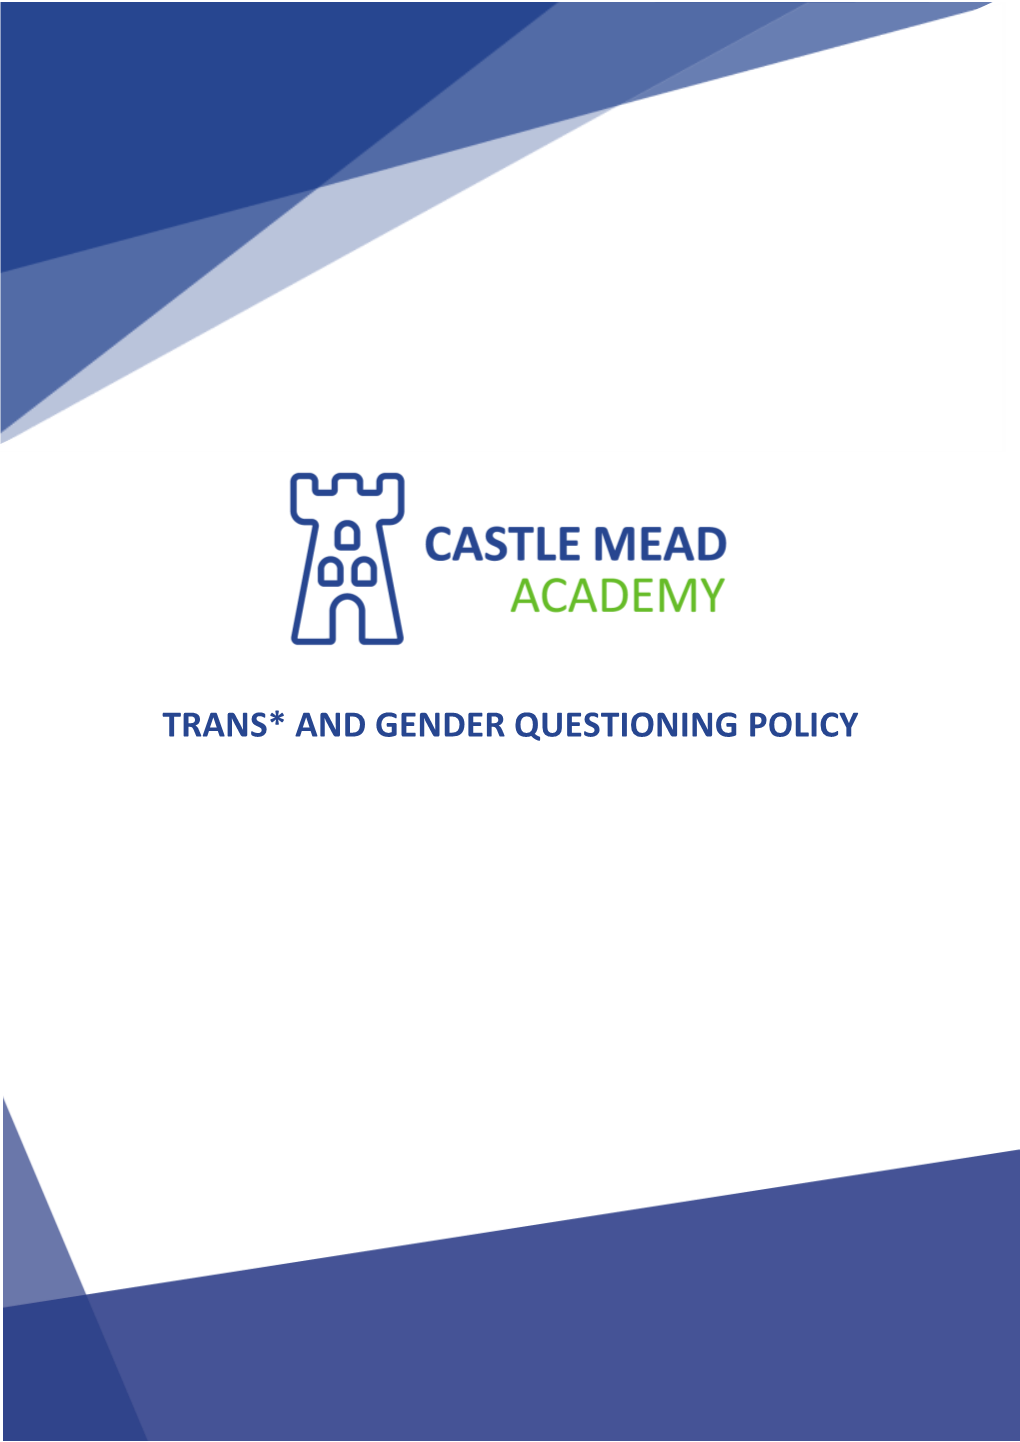 Trans* and Gender Questioning Policy